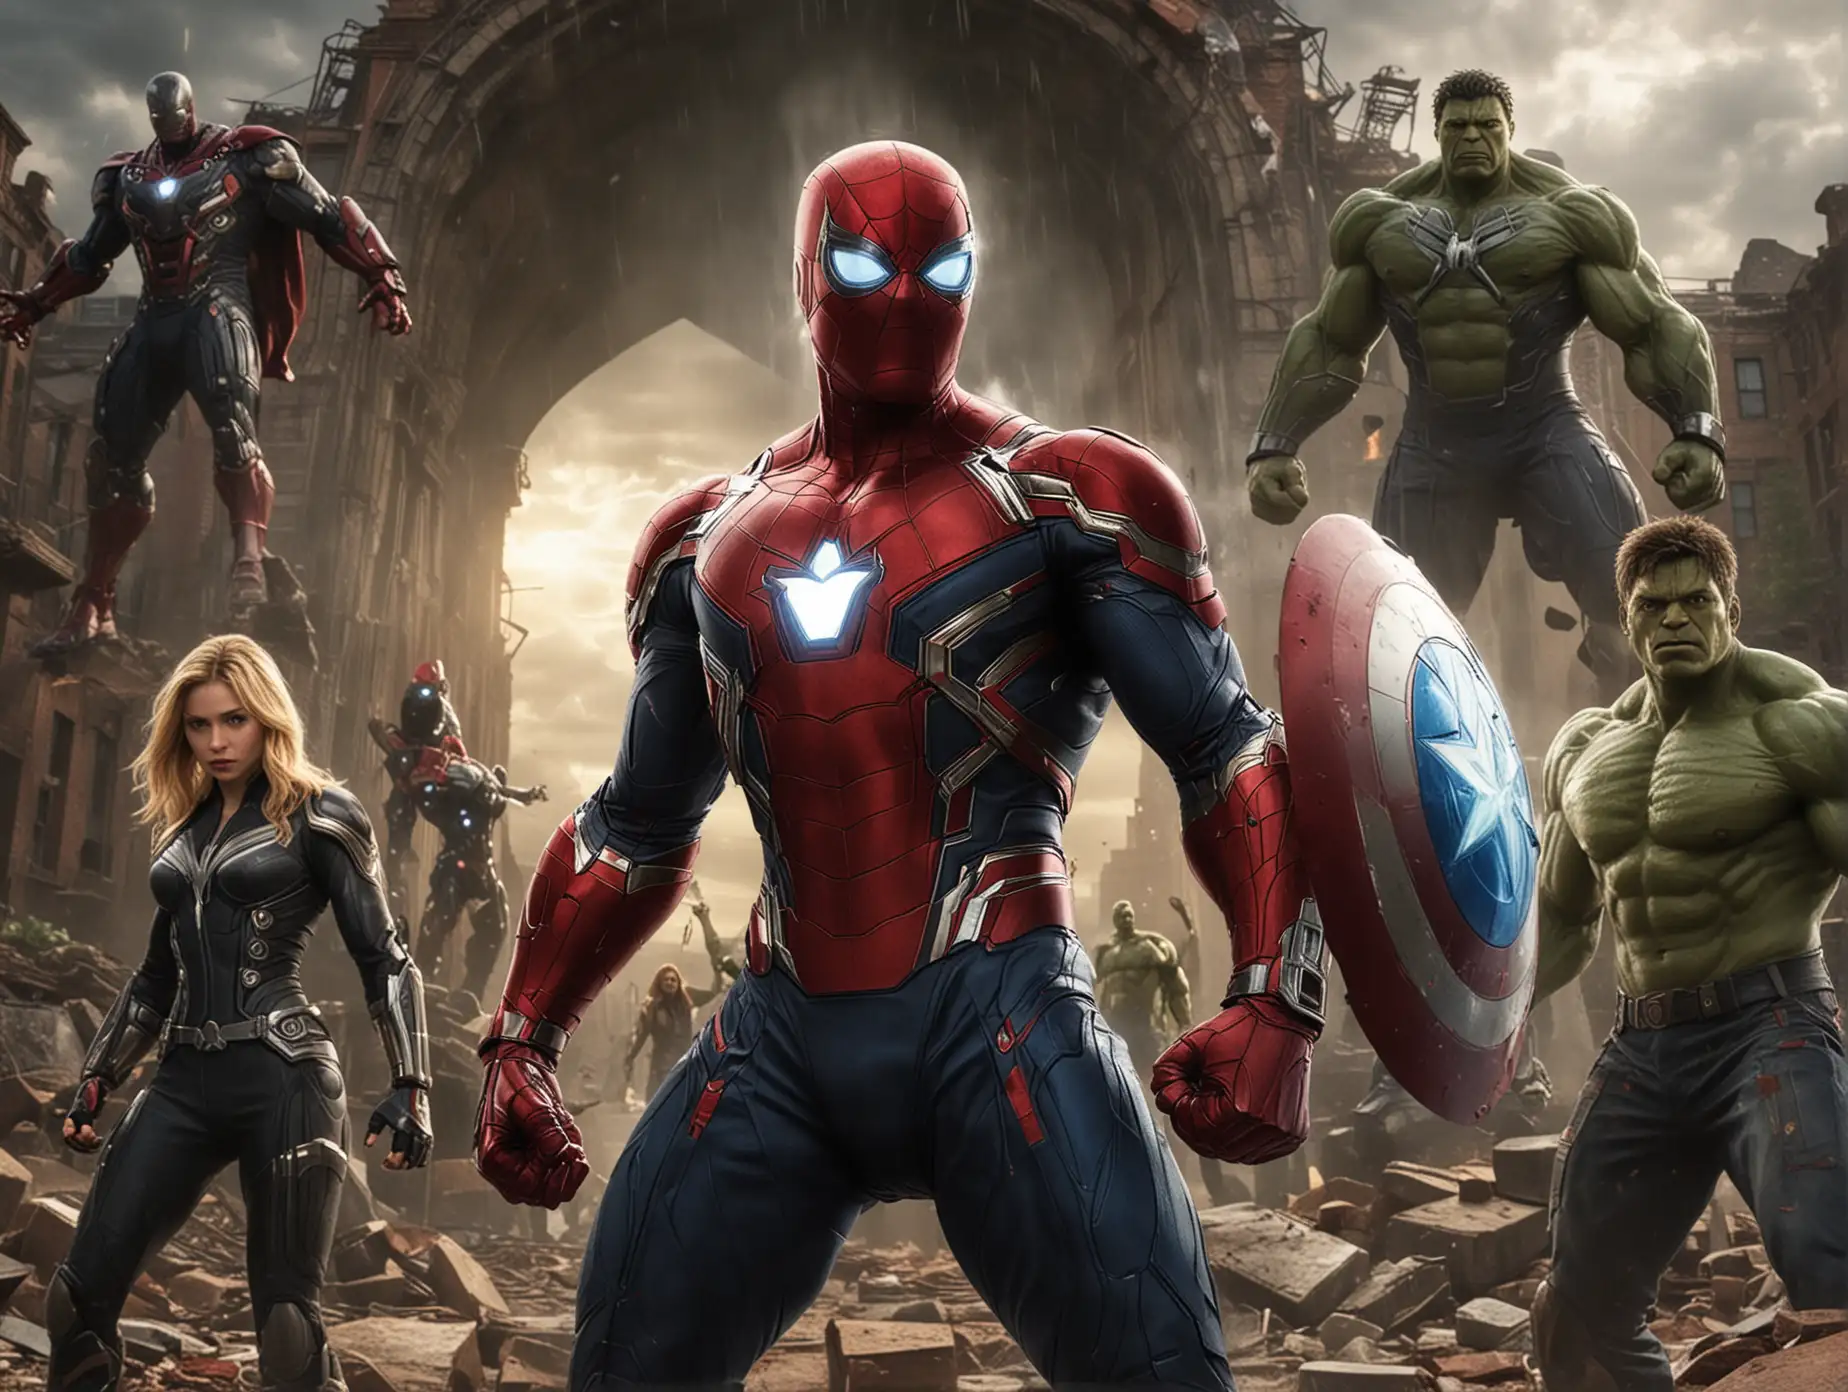 The Avengers movie poster, Iron Man is on the left with his helmet off and hand raised in victory, Captain America's shield facing forward at center of frame, The Hulk stands behind captain america looking to one side, Thor standing right holding Mjolnir over head and blowing lightning out from it, Black Widow stand next ti hulk and thor, Spiderman stood to her far right wearing spiderman suit and webbing around body, she has hands up for support. Background should be an ancient building with thunder storm lighting coming down through cracks in background. --ar 128:89